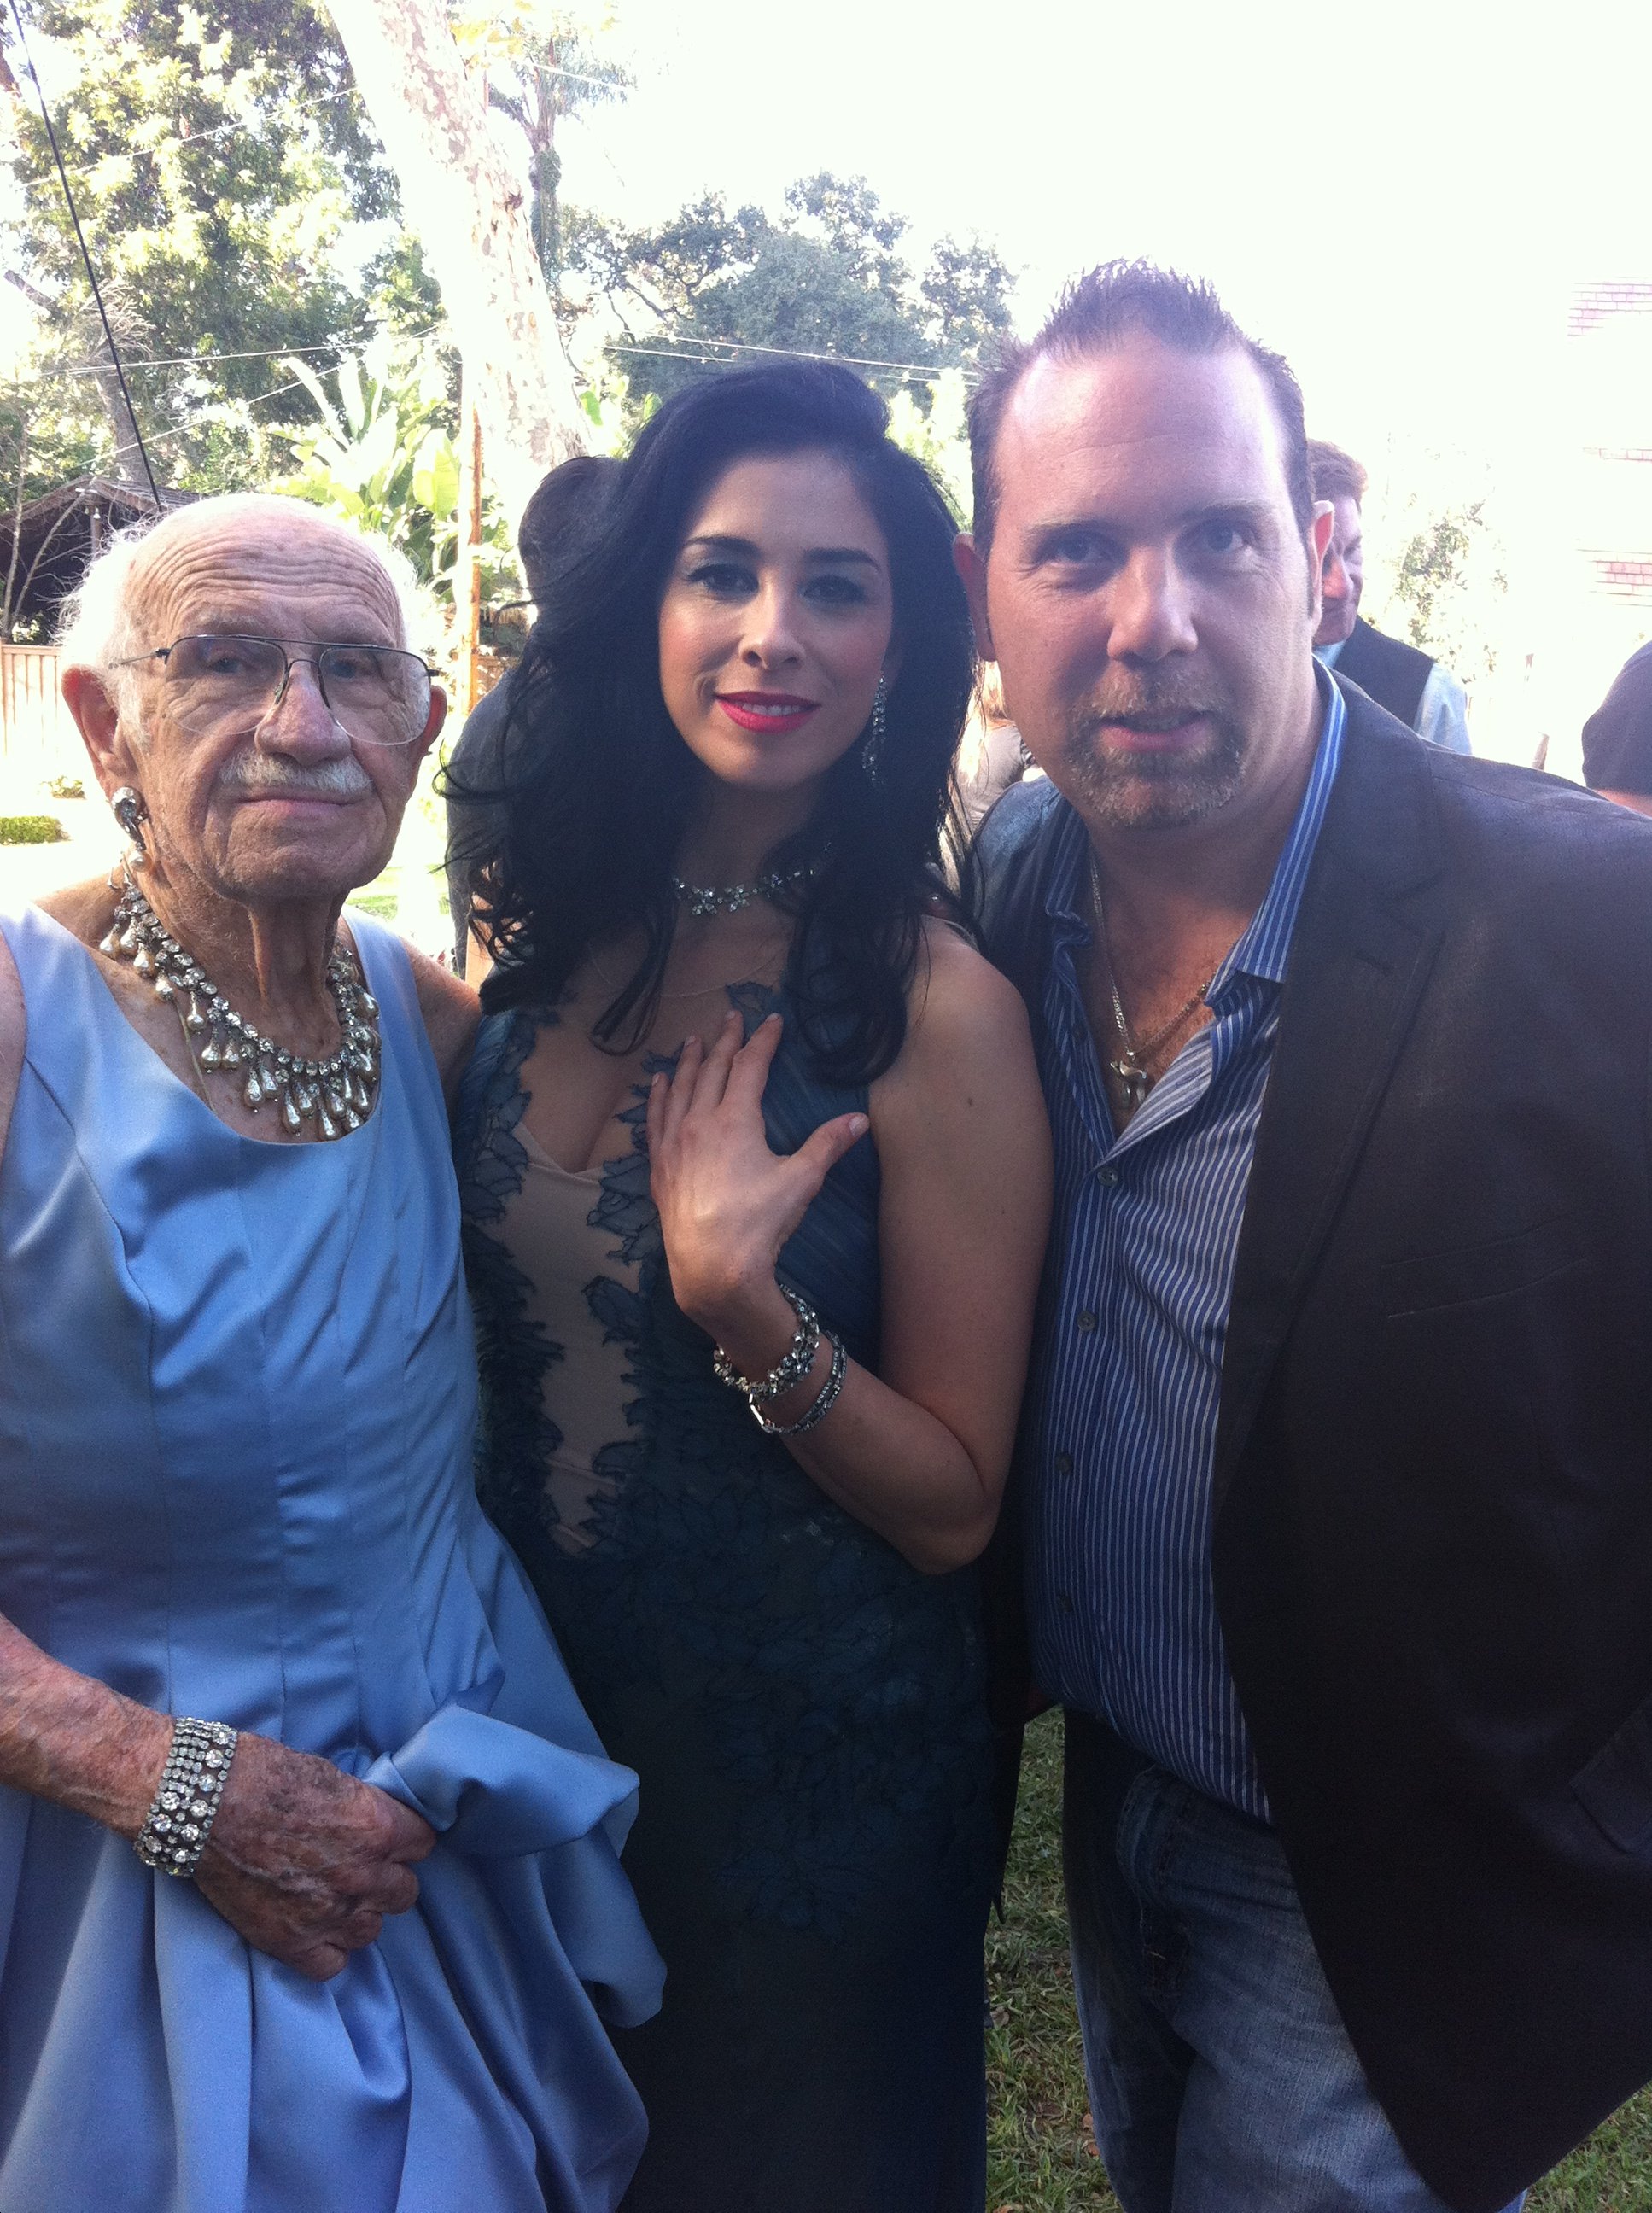 With 91 years young Murray Gershenz & the First Lady of Comedy, Ms. Sarah Silverman at the Vanity Fair shoot.